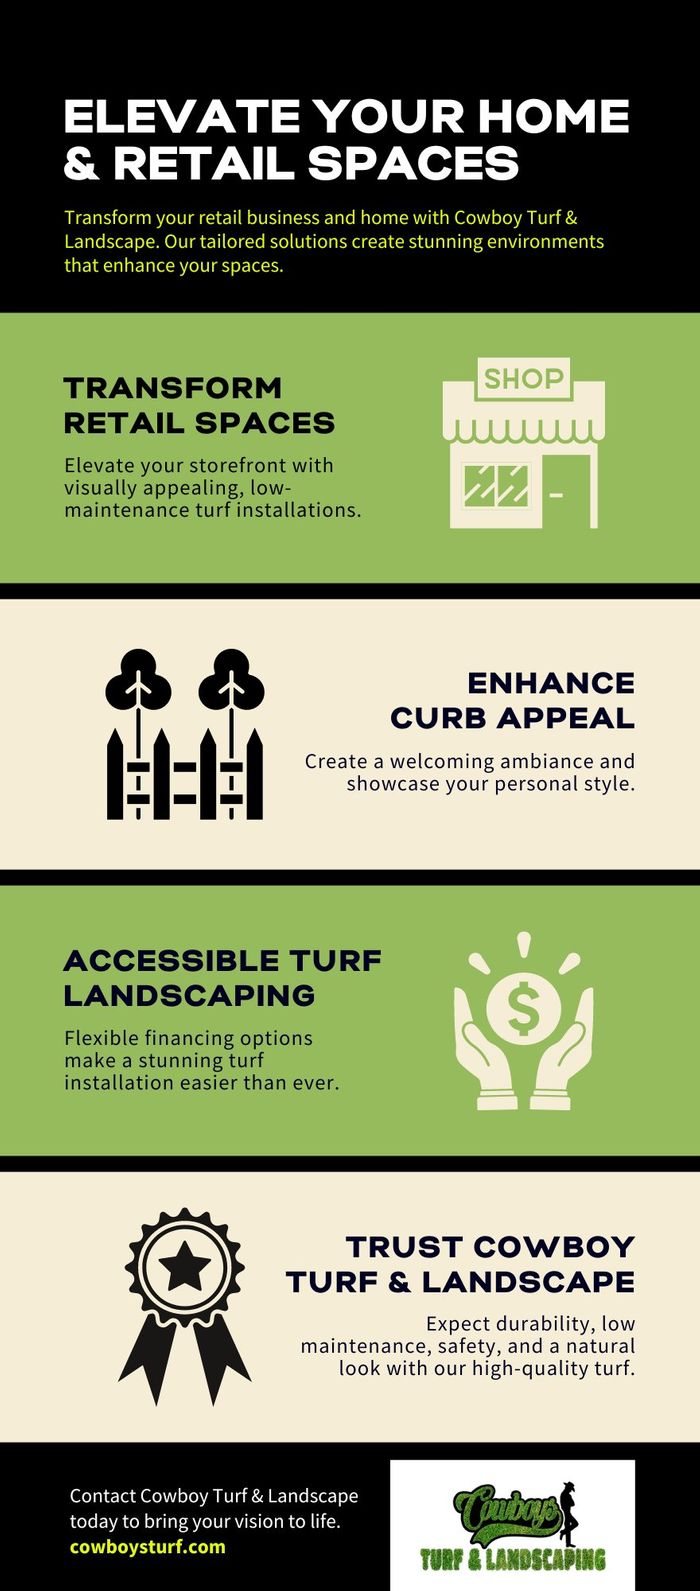 M43235 - Infographic - Elevate Your Home Retail Spaces.jpg